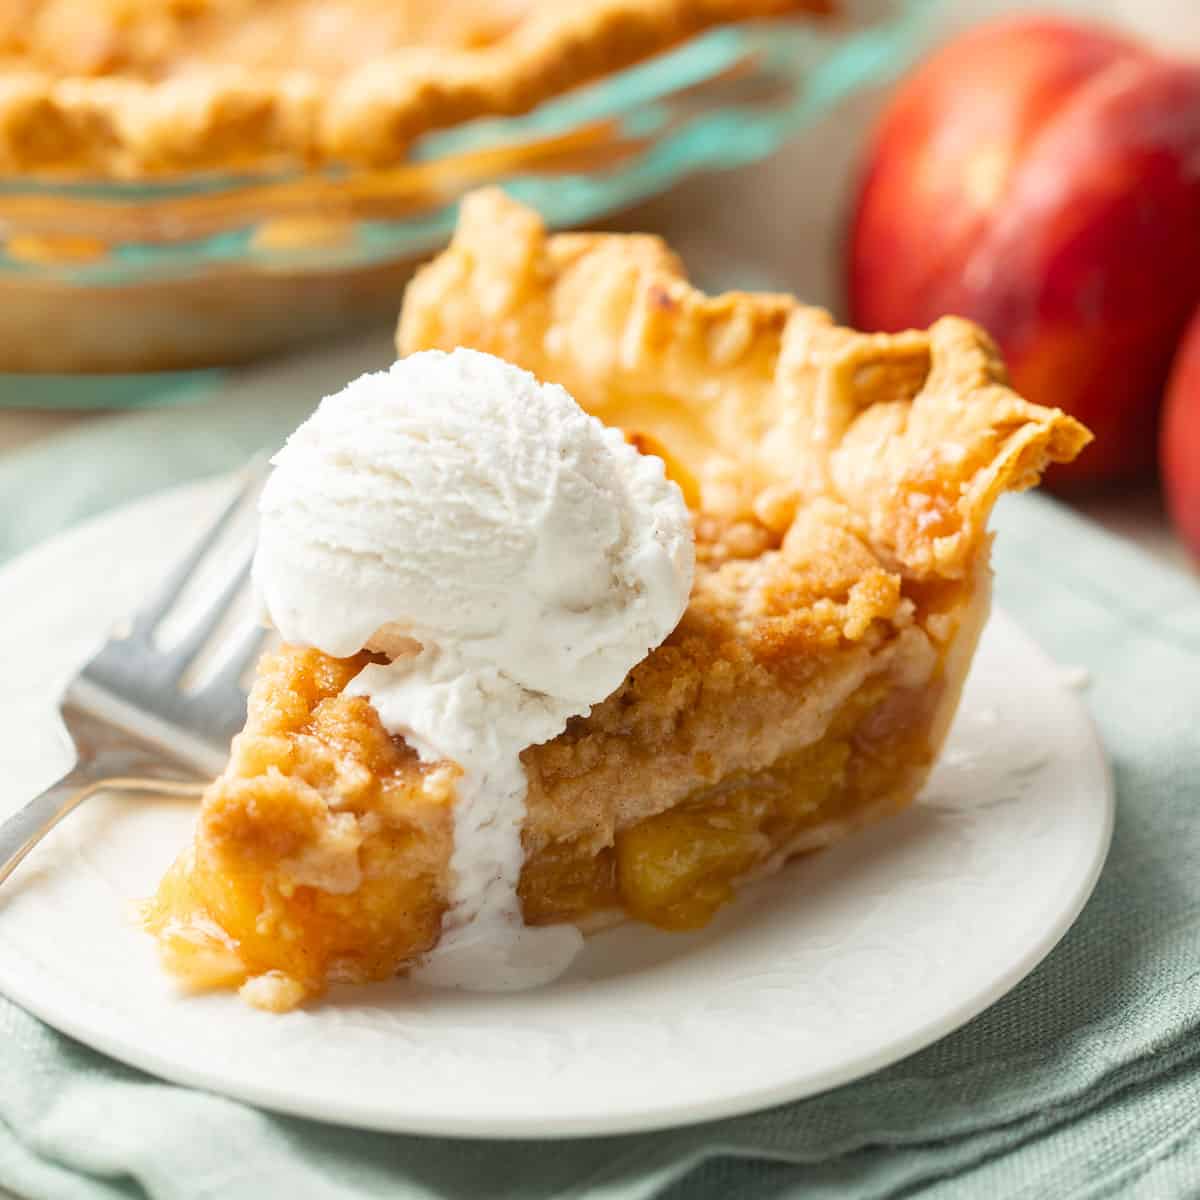 Vegan Peach Pie with Crumble Topping